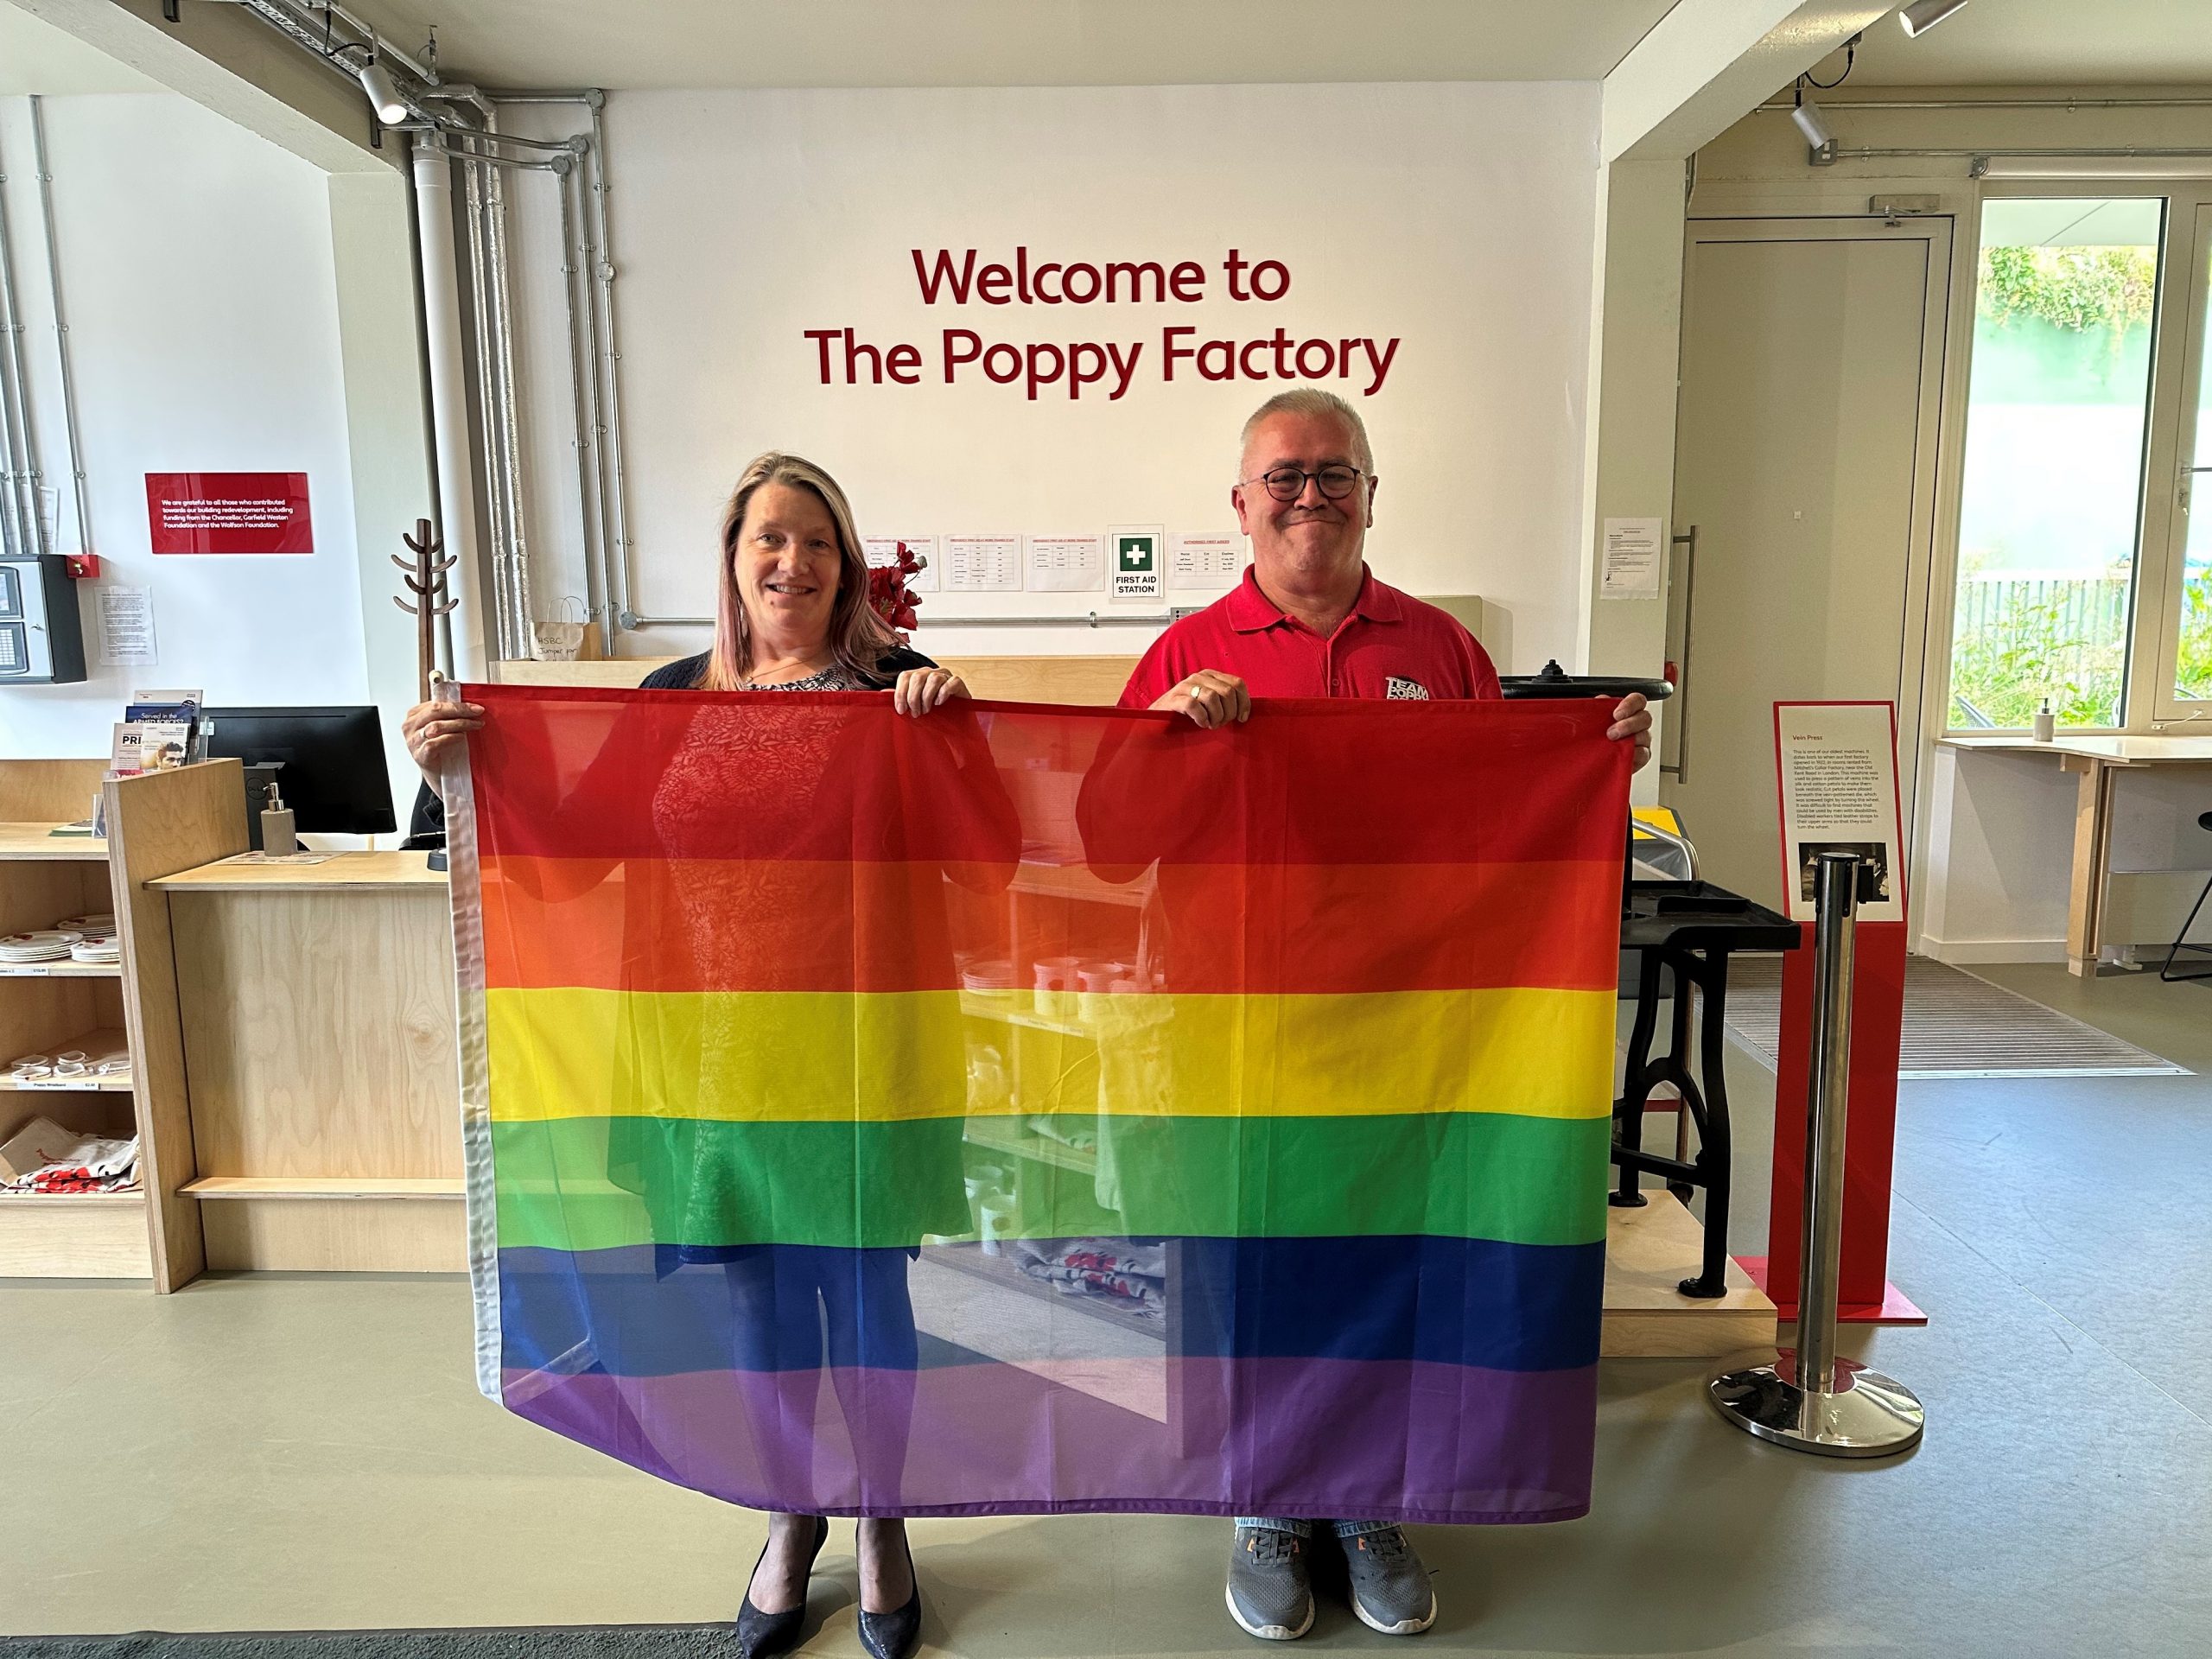 SMART Recovery and the LGBTQ+ Community – Sussex Pride